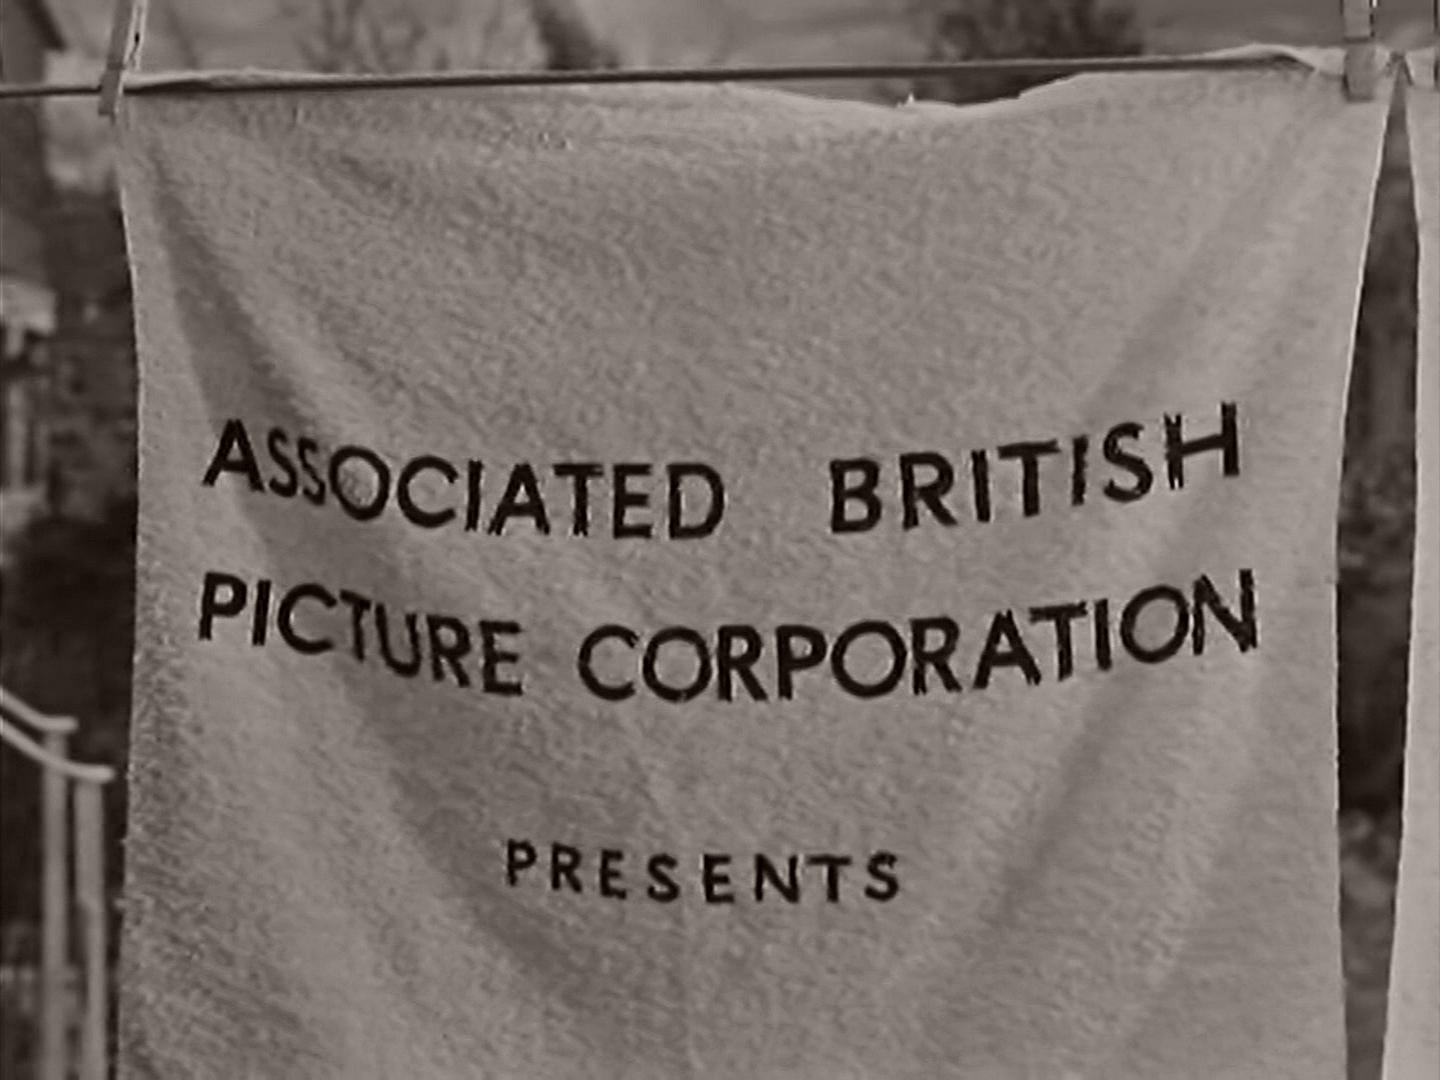 Main title from Young Wives’ Tale (1951) (1). Associated British Picture Corporation presents